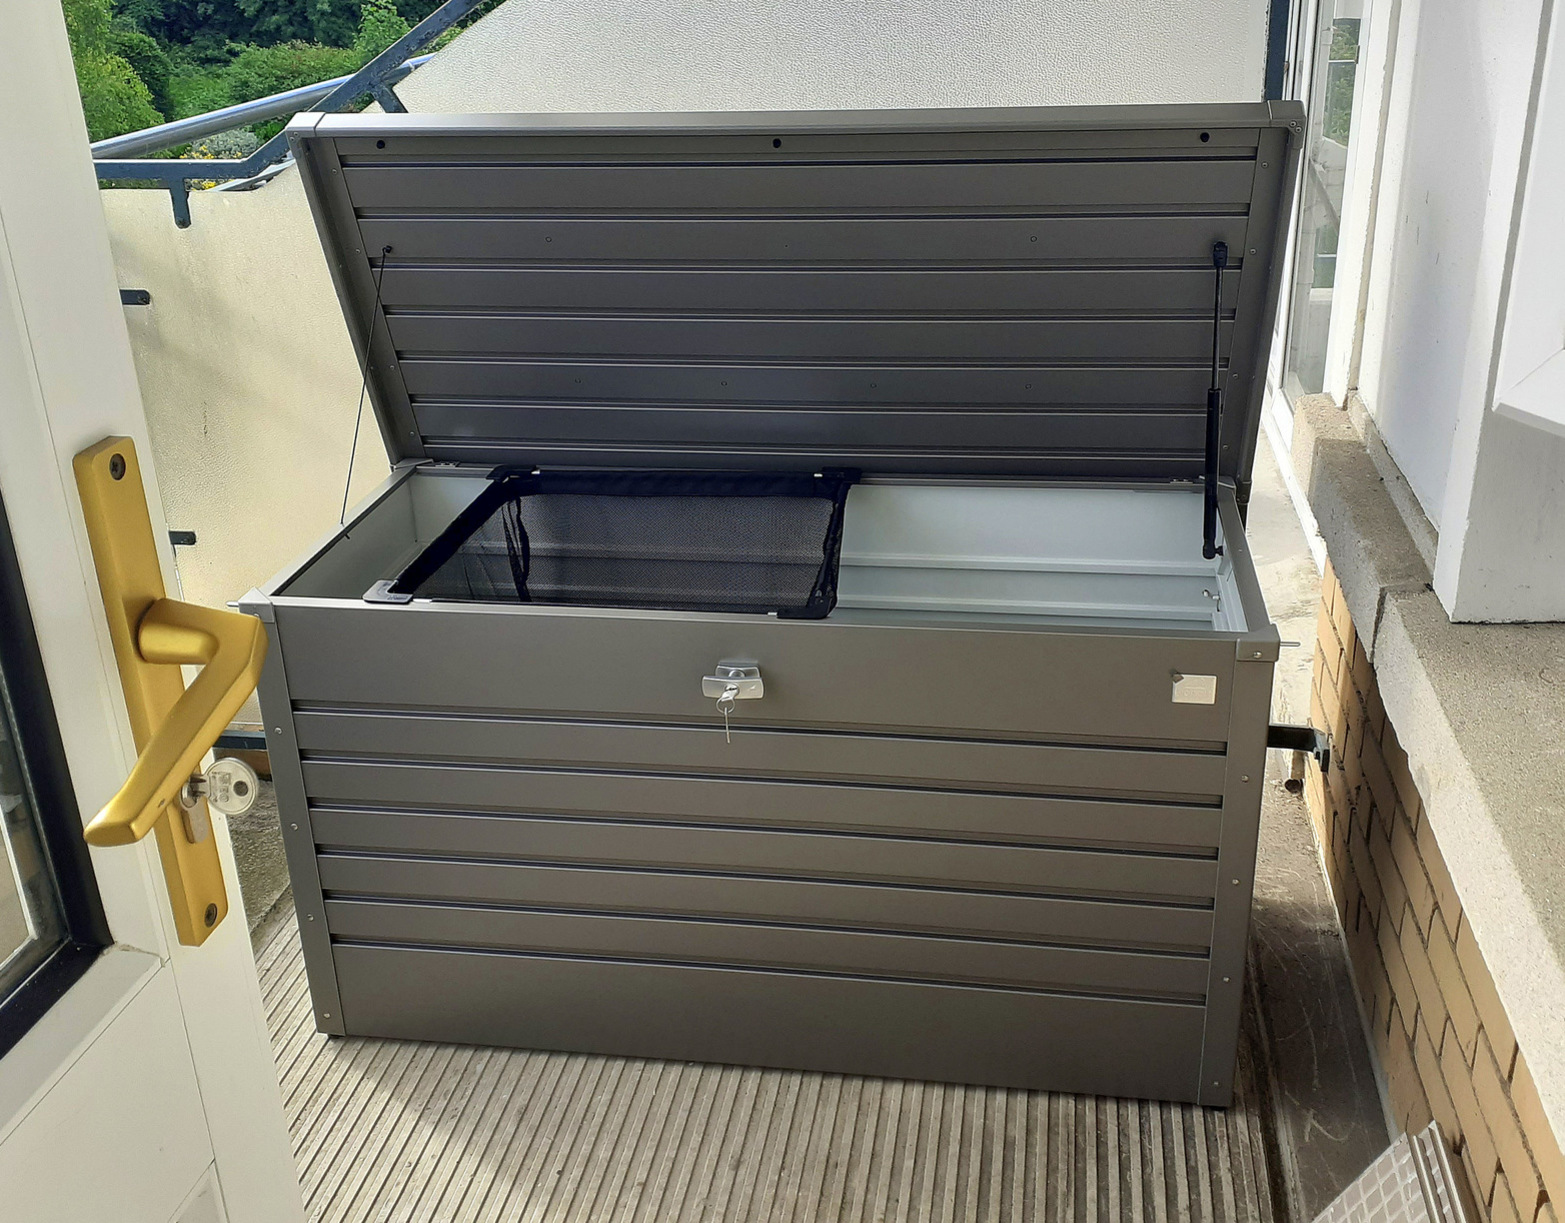 Biohort LeisureTime Box, Size 130 installation on Apartment Balcony in Booterstown, Co Dublin | Owen Chubb GardenStudio, Tel 087-2306128 | Ireland's # 1 Biohort Dealer |  Best prices with FREE Assembly & Installation on selected Sheds & Sizes in Dublin